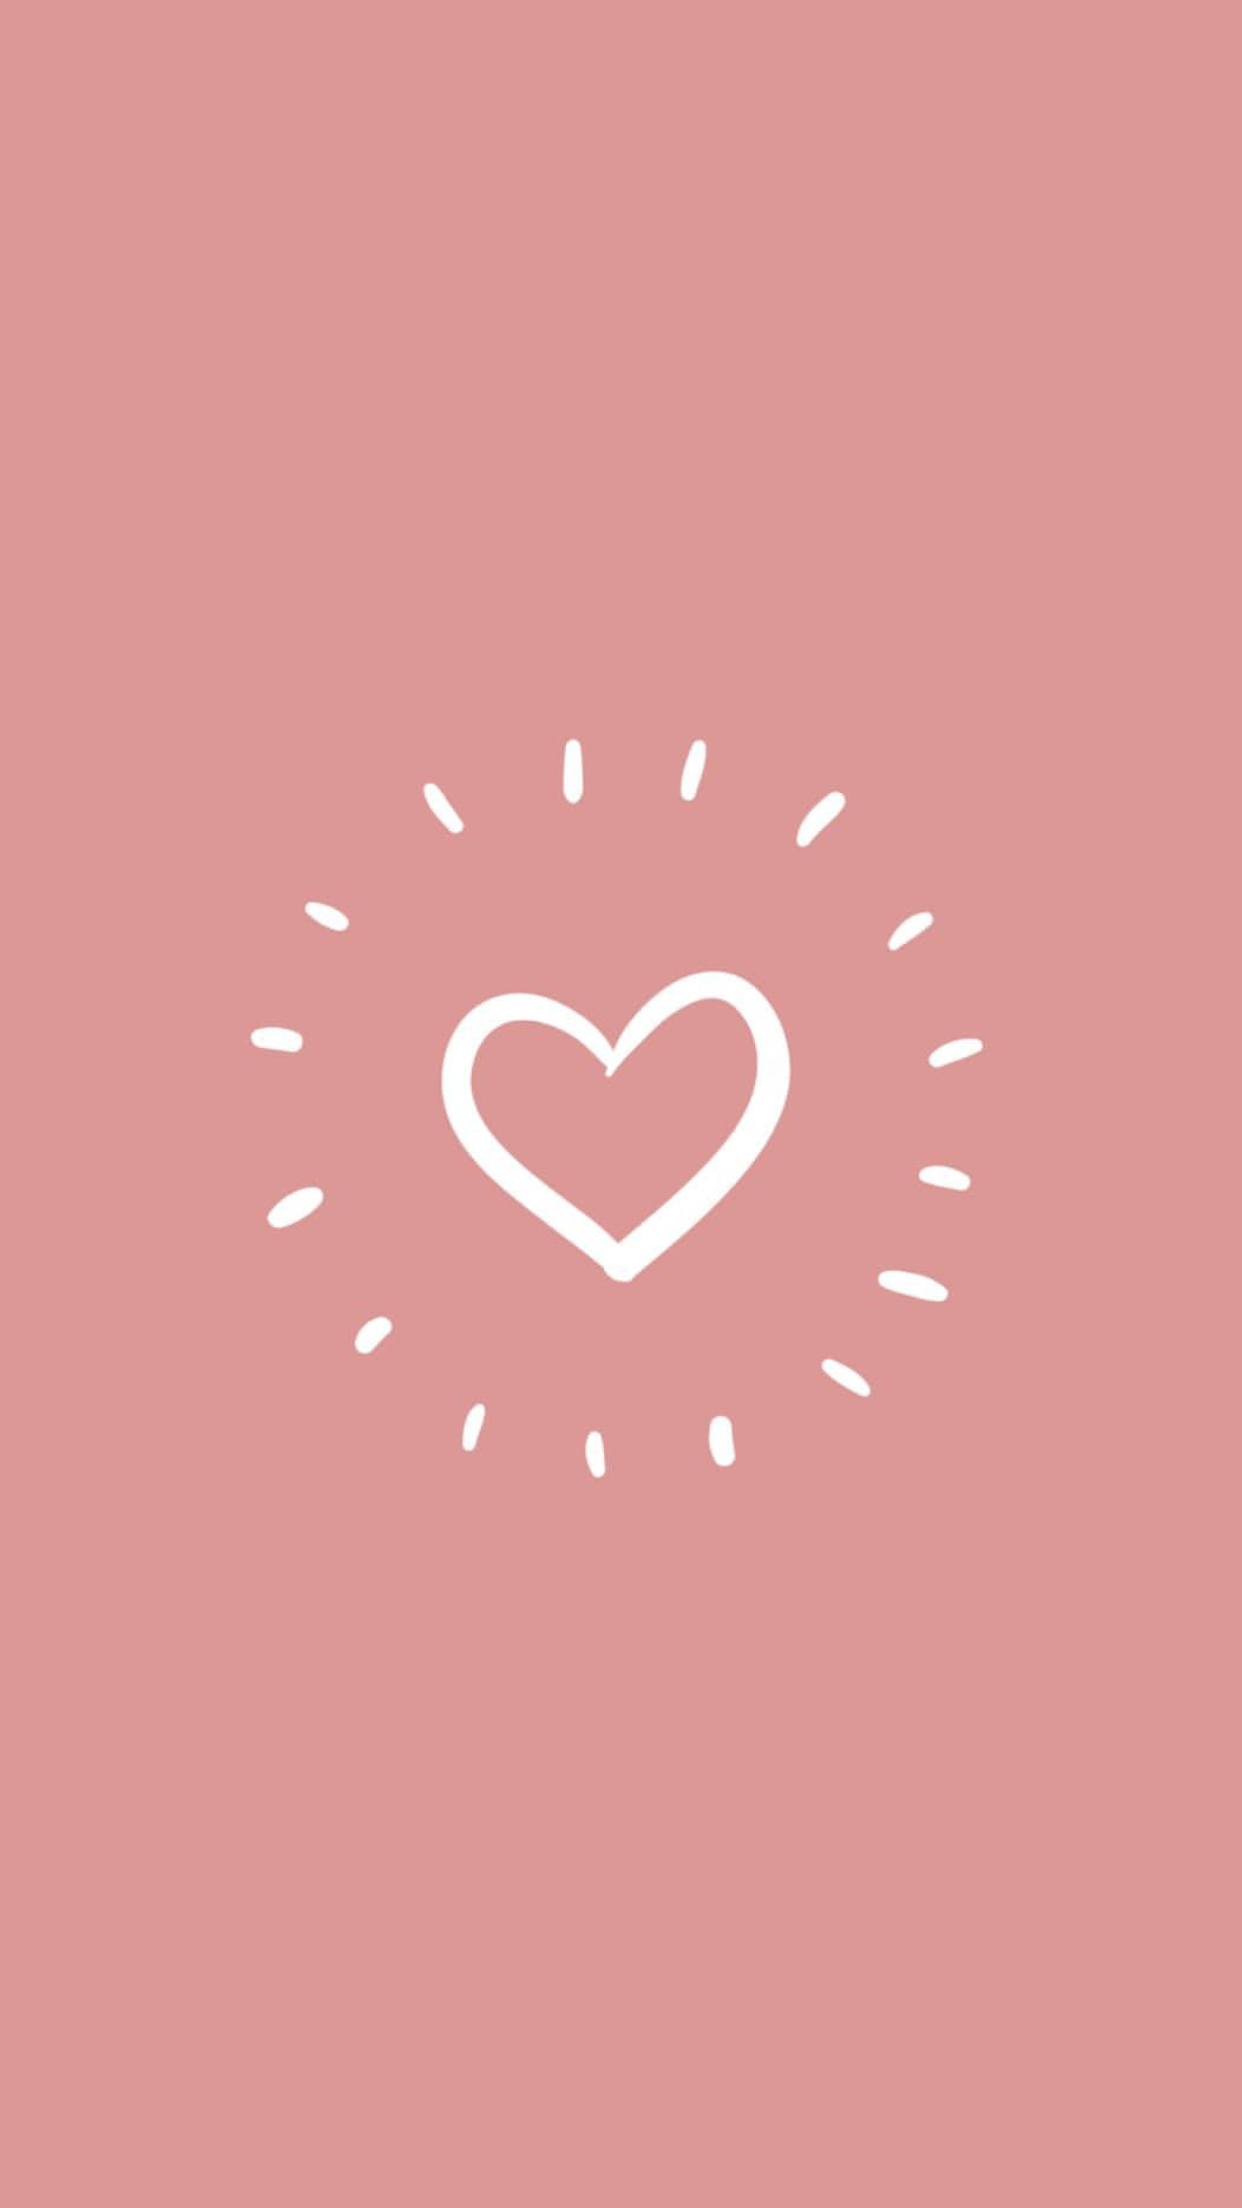 A pink background with a white heart in the middle - Heart